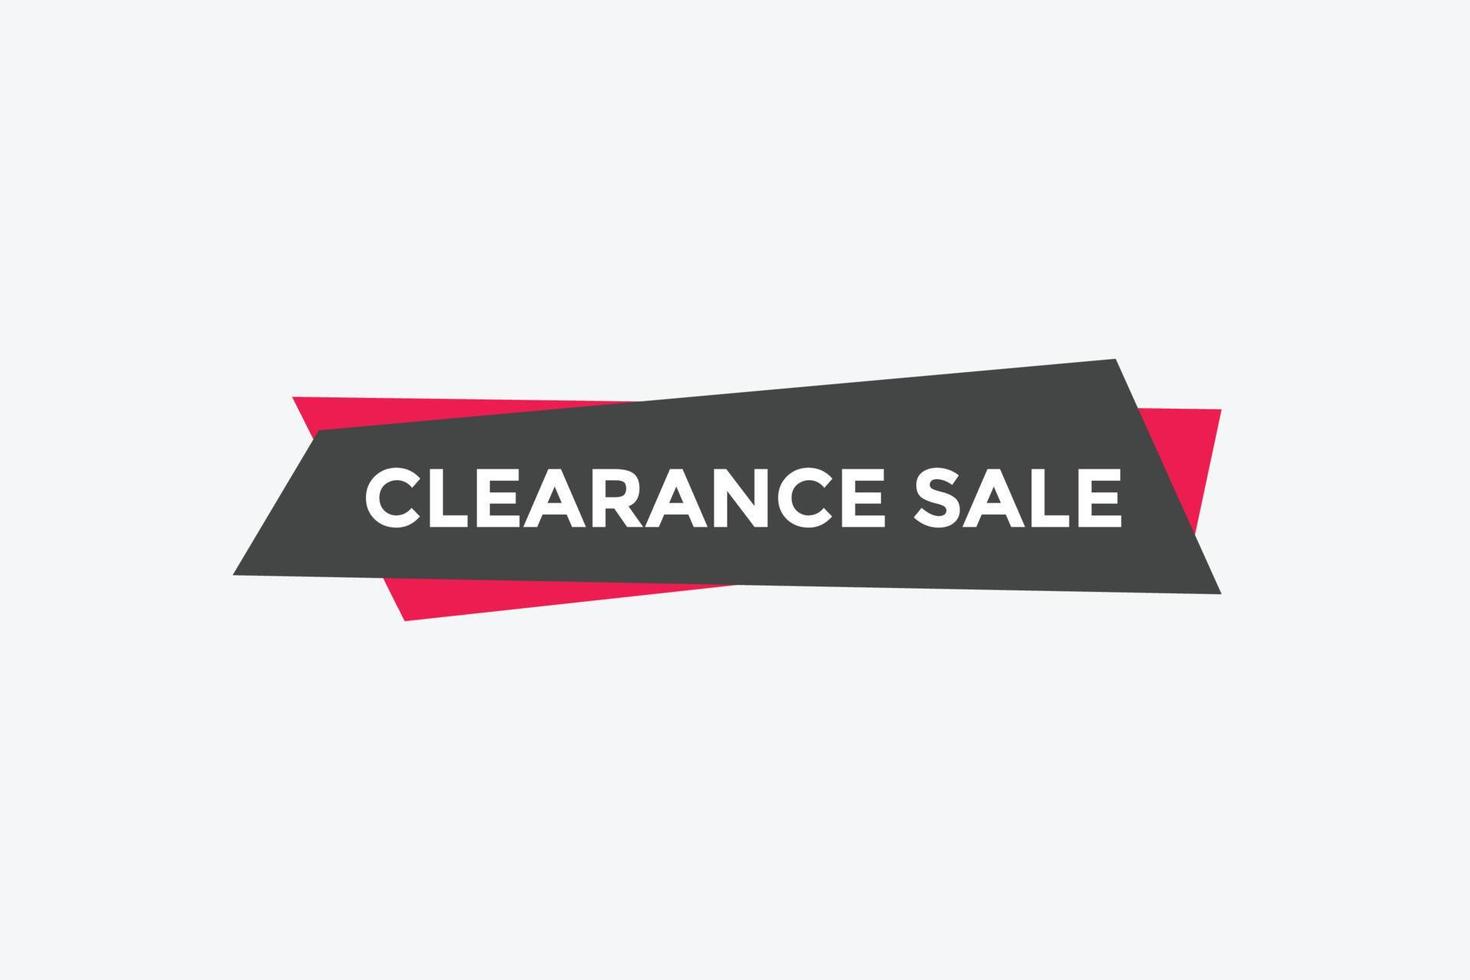 https://static.vecteezy.com/system/resources/previews/011/421/870/non_2x/clearance-sale-button-clearance-sale-speech-bubble-clearance-sale-banner-label-promotion-template-illustration-vector.jpg